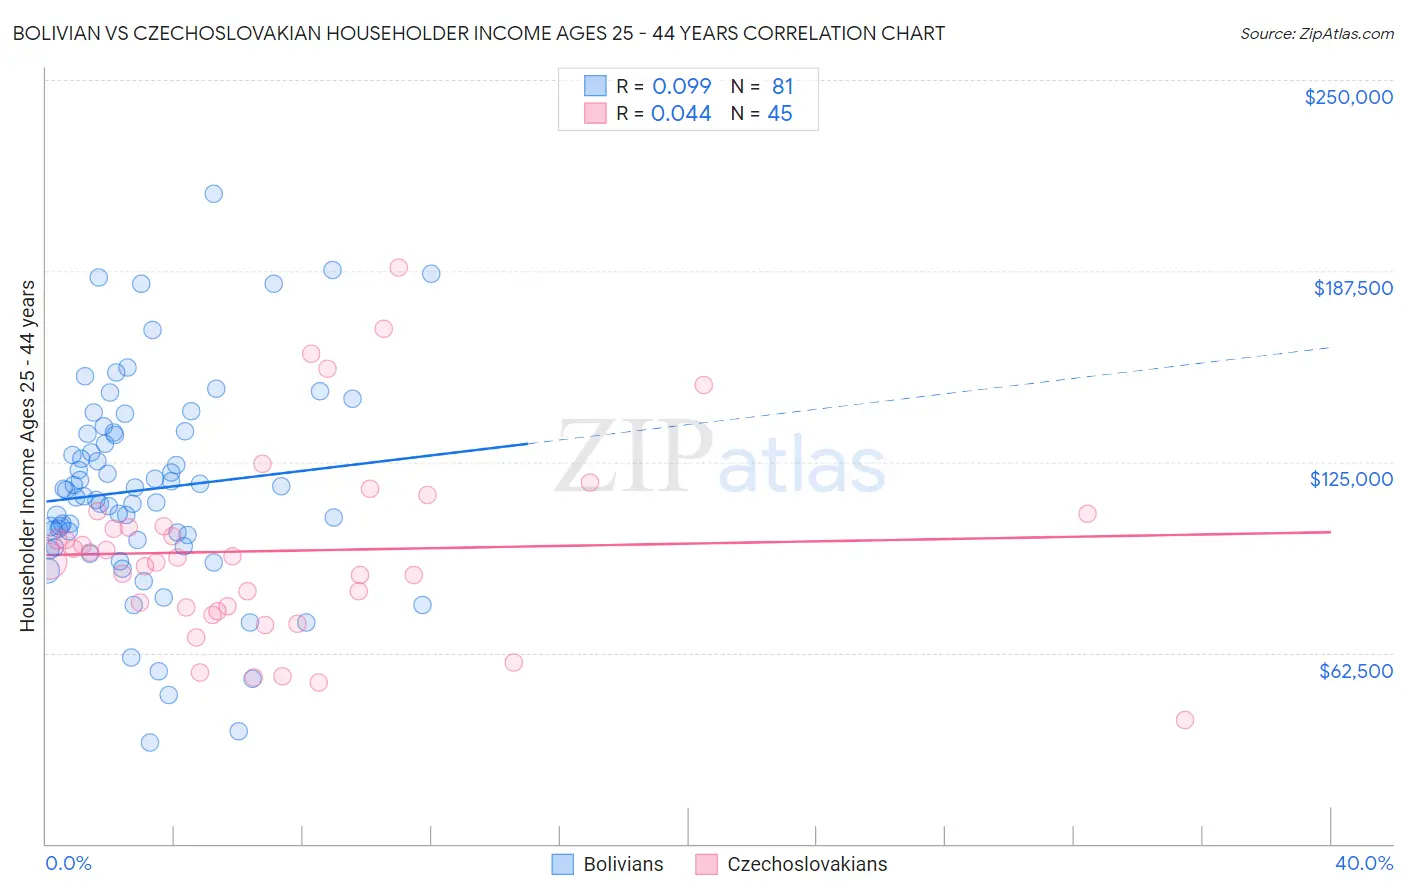 Bolivian vs Czechoslovakian Householder Income Ages 25 - 44 years